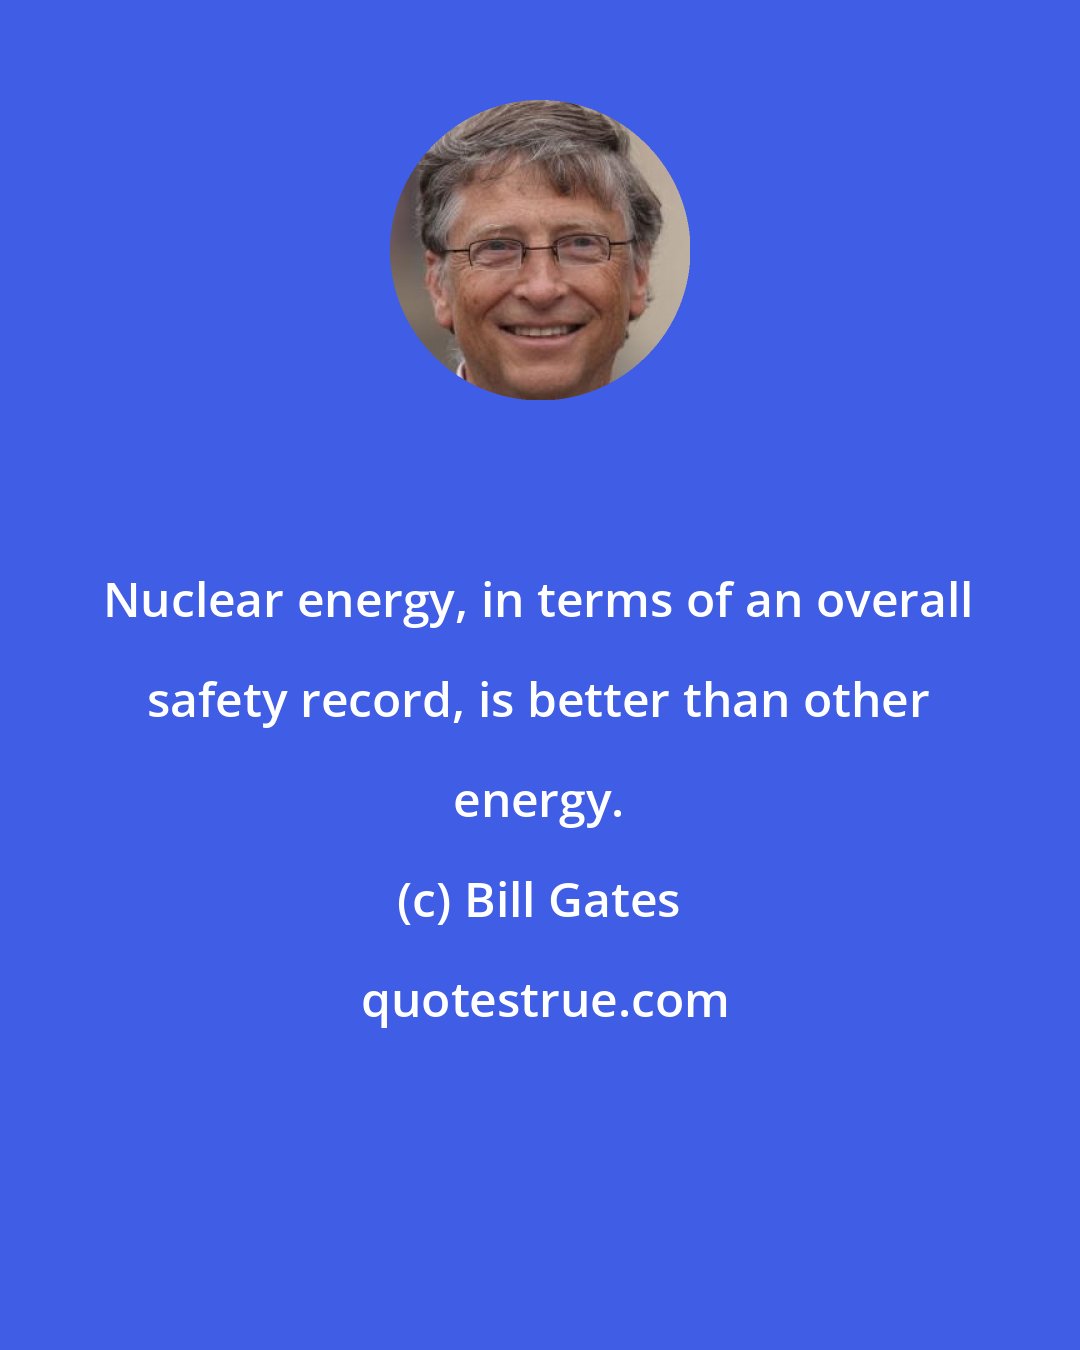 Bill Gates: Nuclear energy, in terms of an overall safety record, is better than other energy.